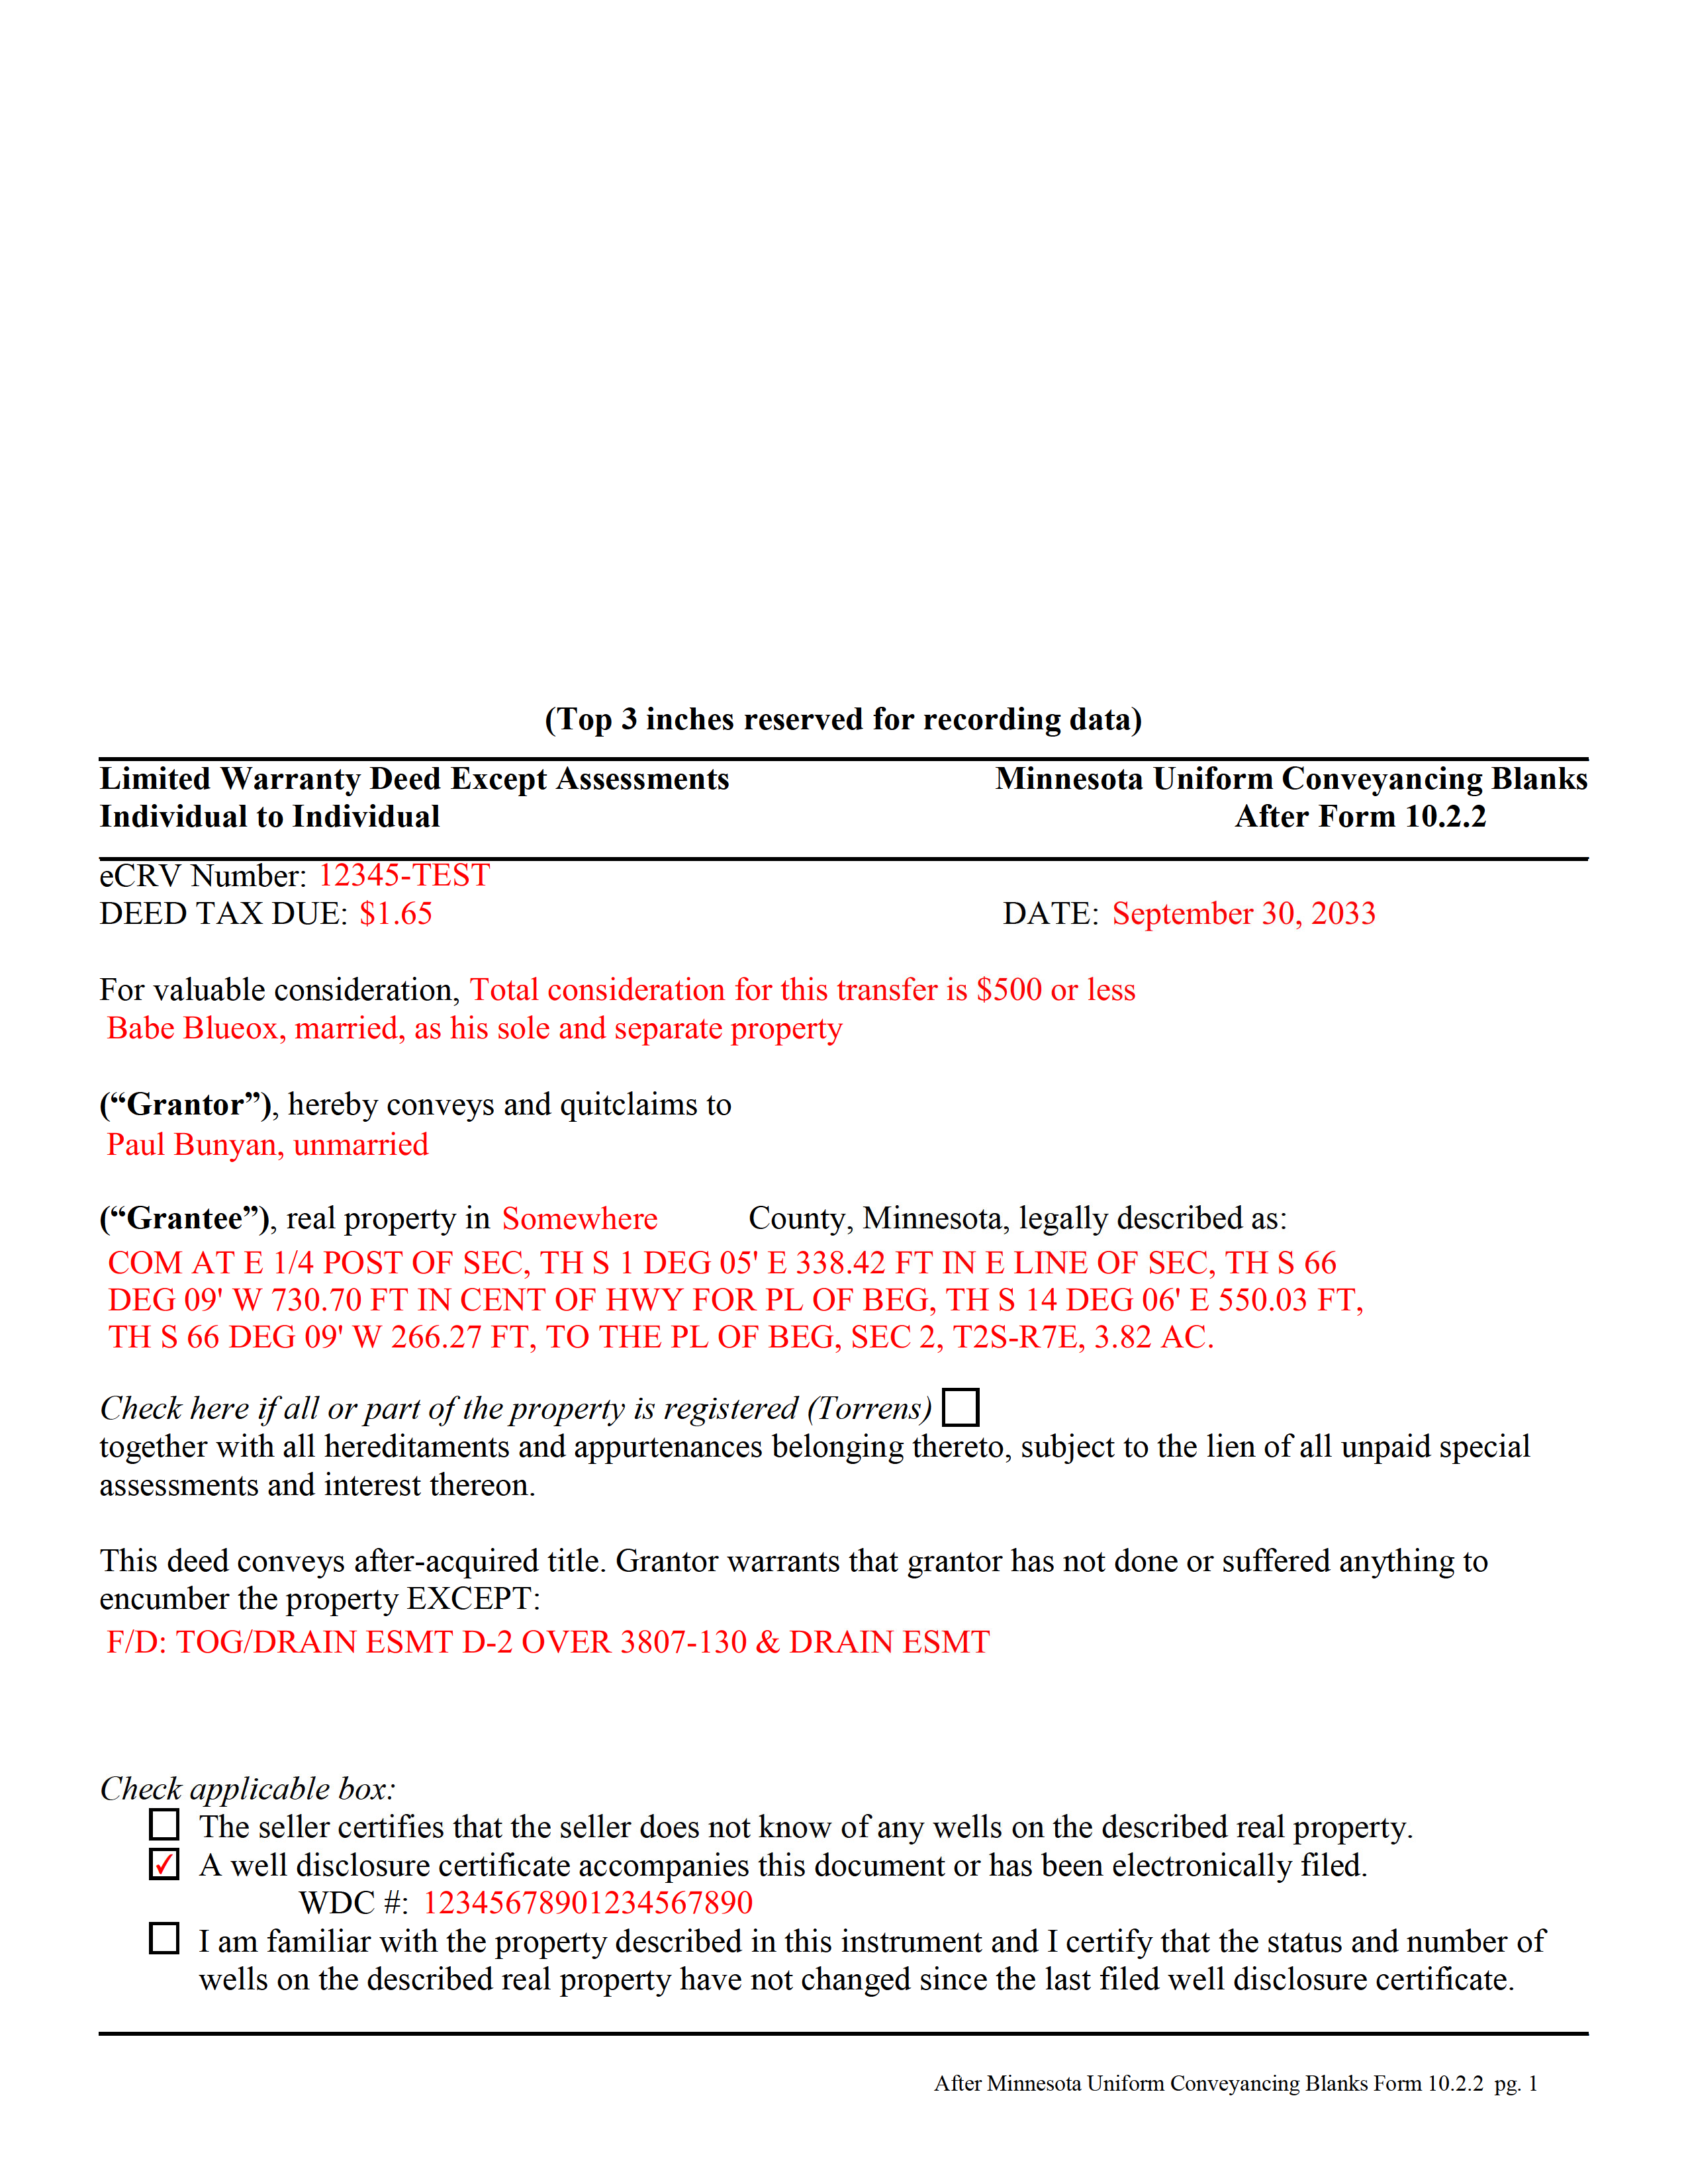 Completed Example of the Limited Warranty Deed Excluding Assessment Form